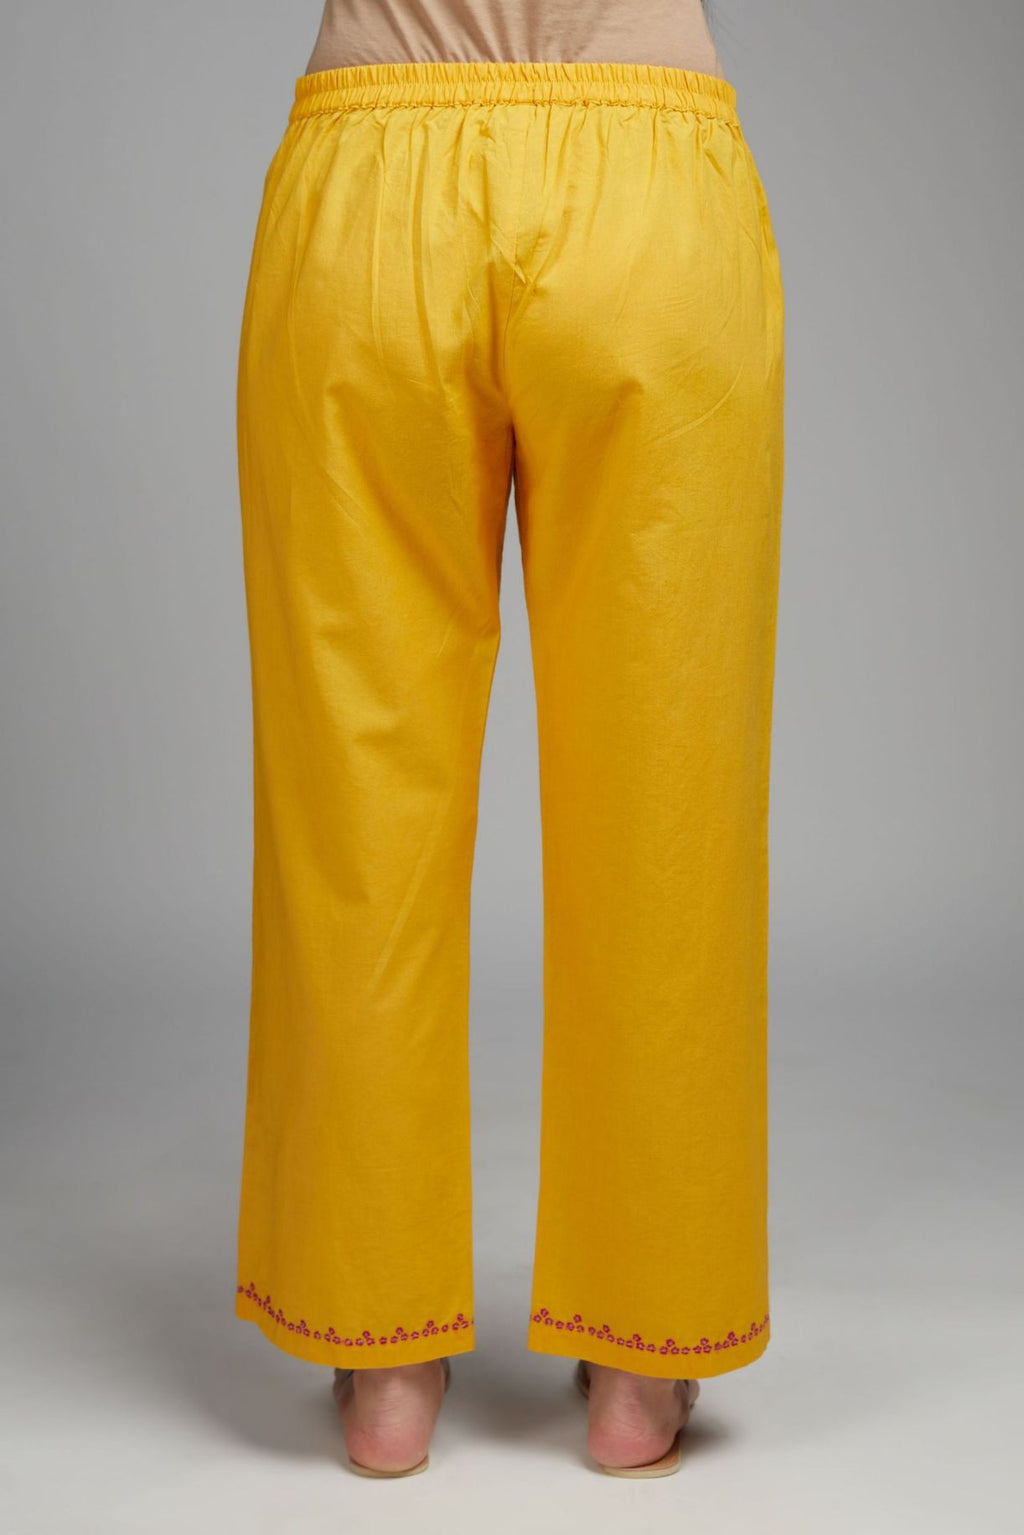 Mango yellow cotton straight pant with embroidered hem